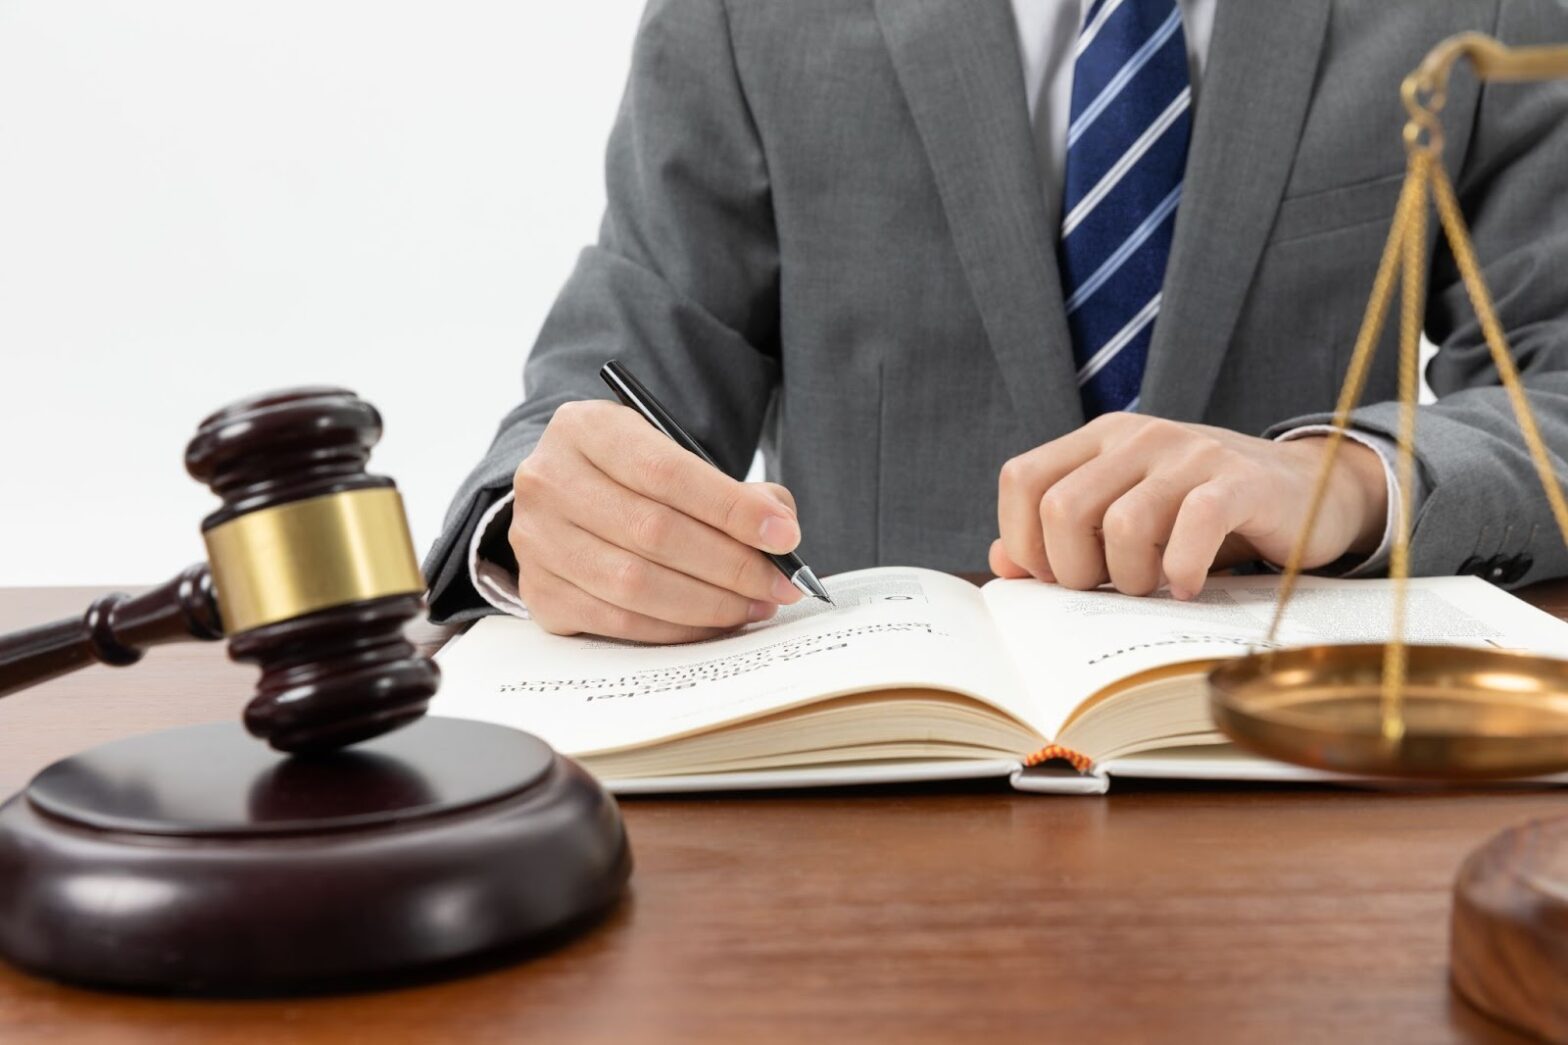 Close up shot of a person writing in a book with a gavel on the table